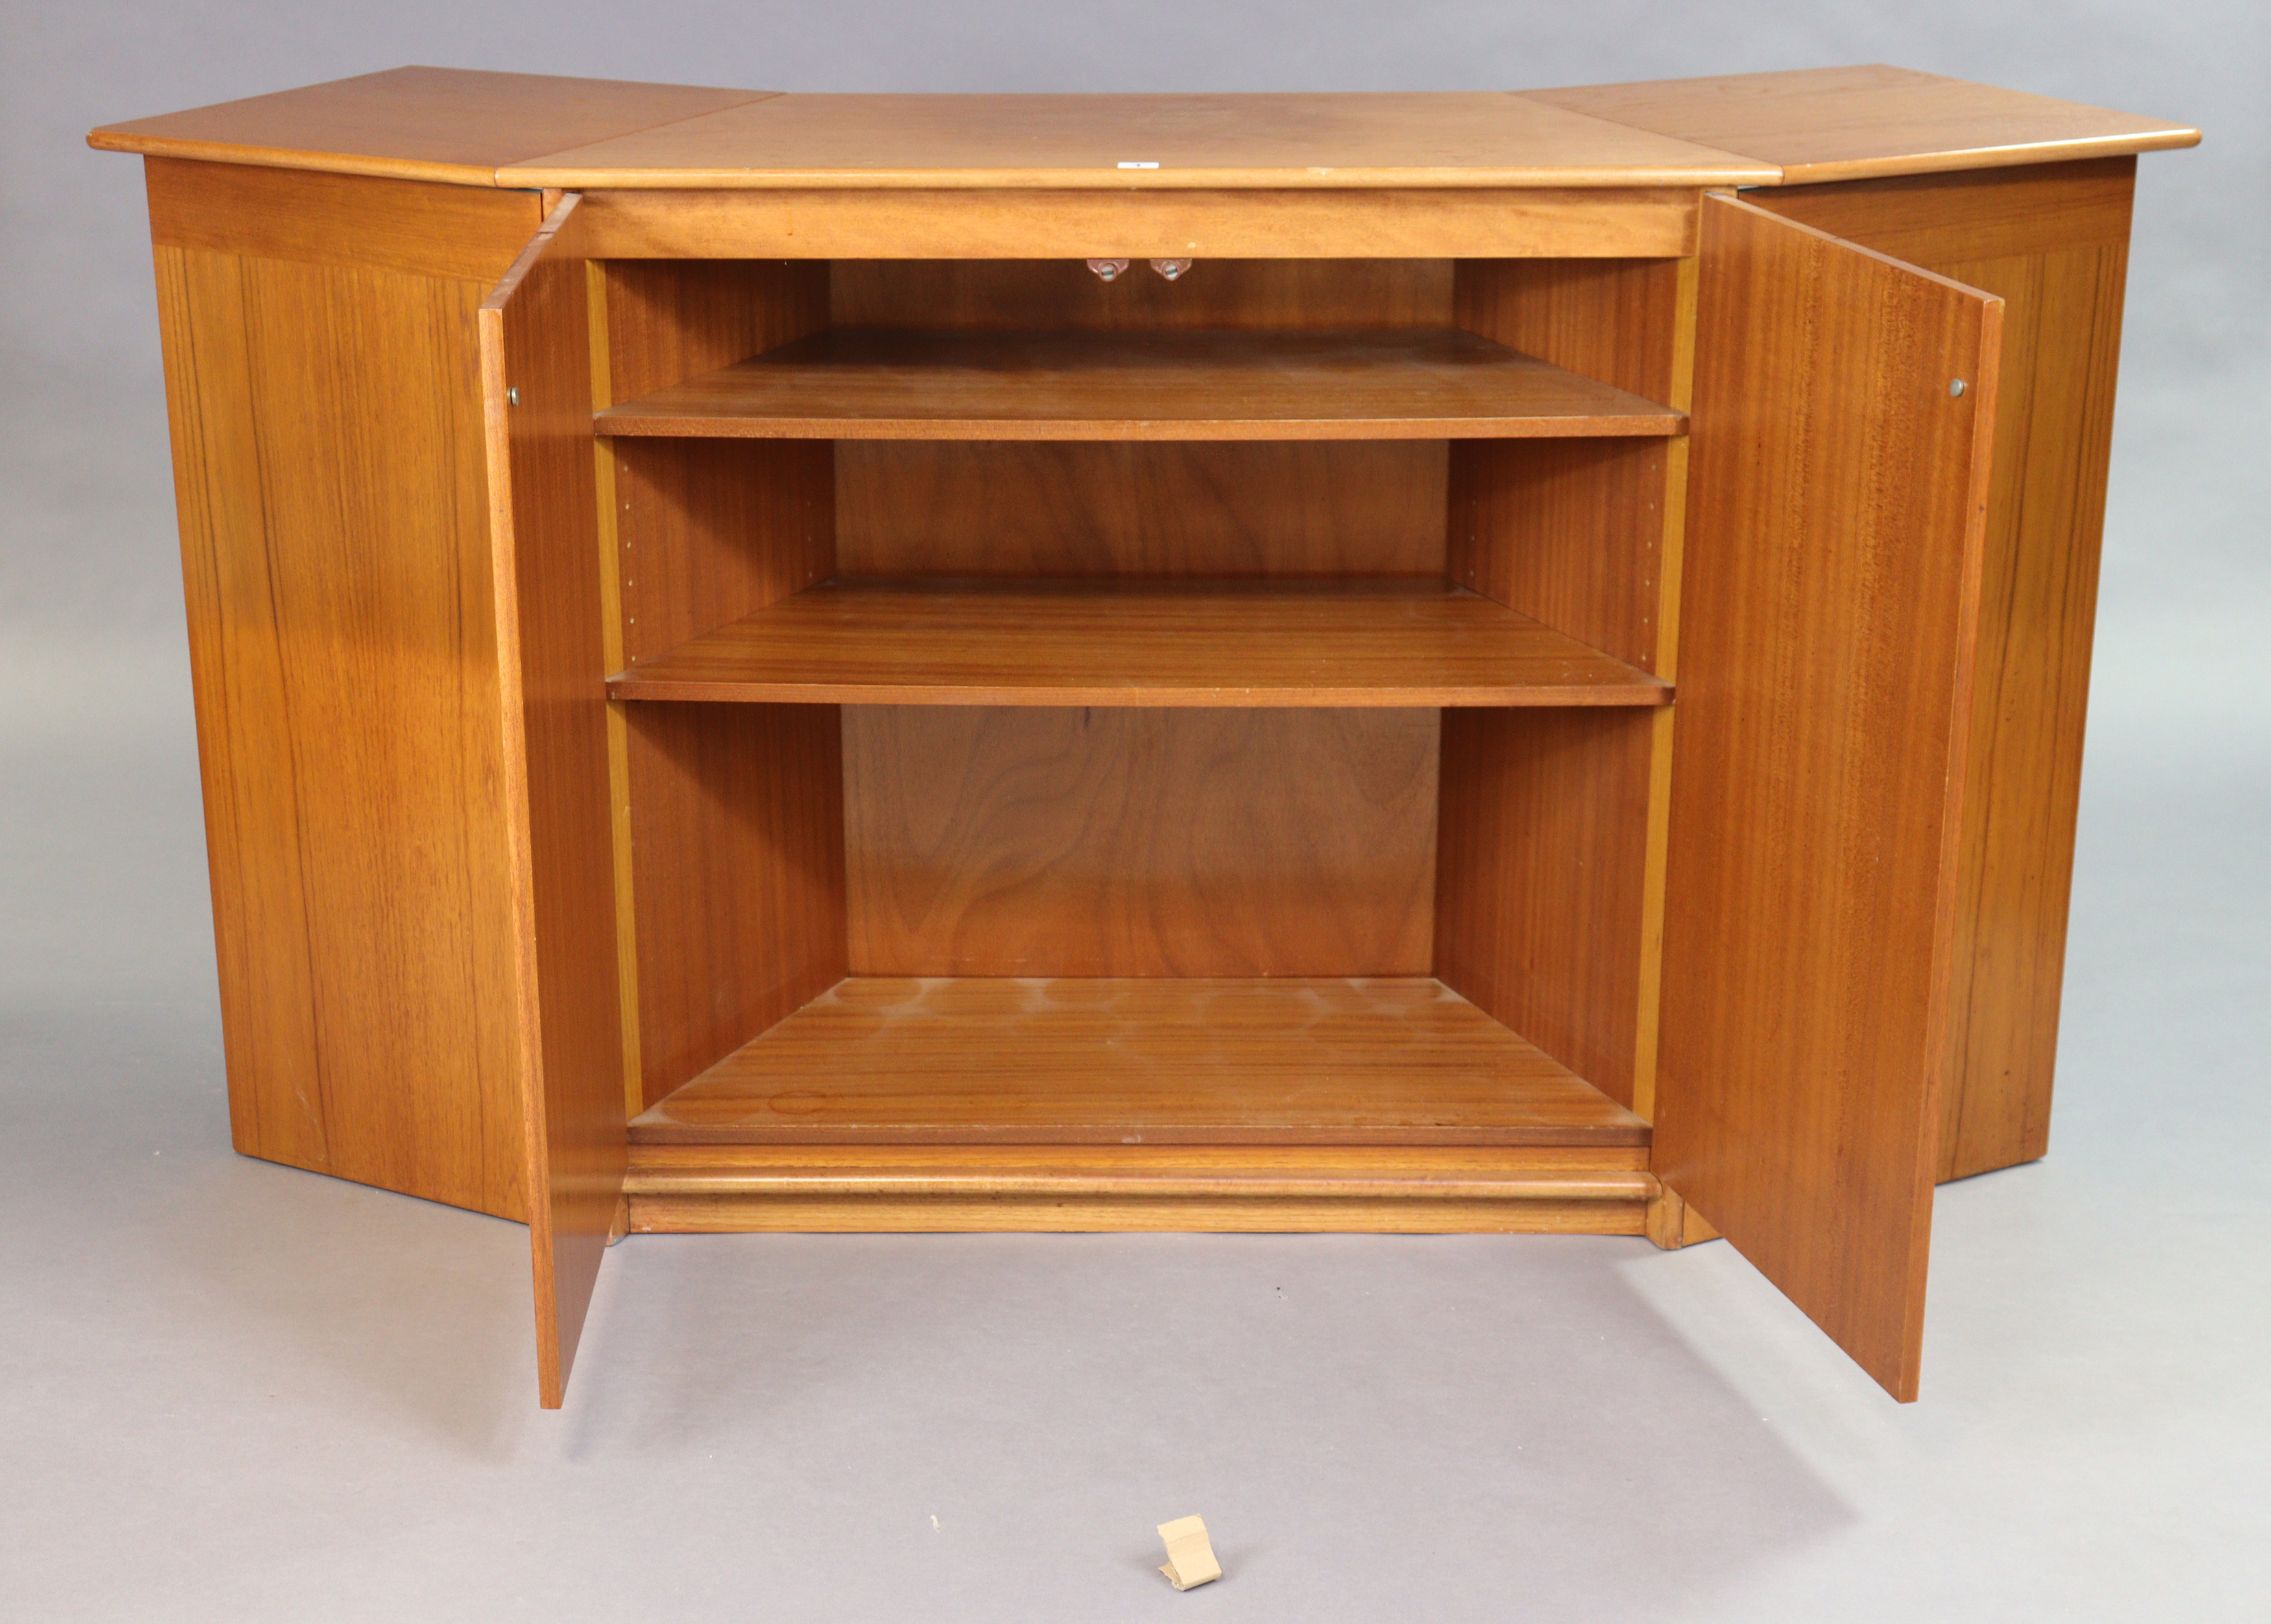 A mid-20th century teak drop-leaf drinks cabinet, side cabinet with two adjustable shelves - Image 2 of 4